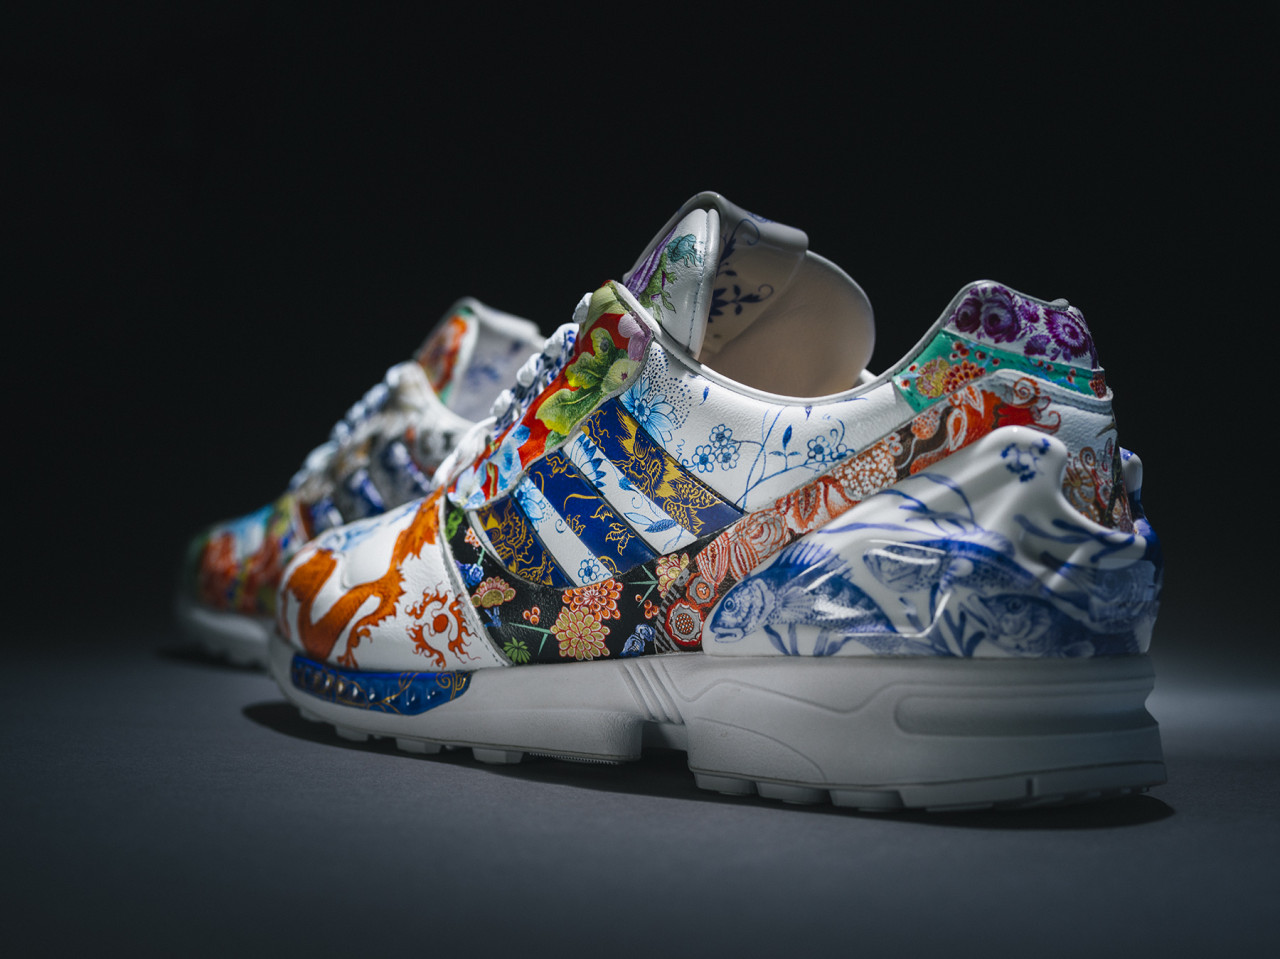 MEISSEN x adidas ZX8000 Porcelain Is Two of a Kind